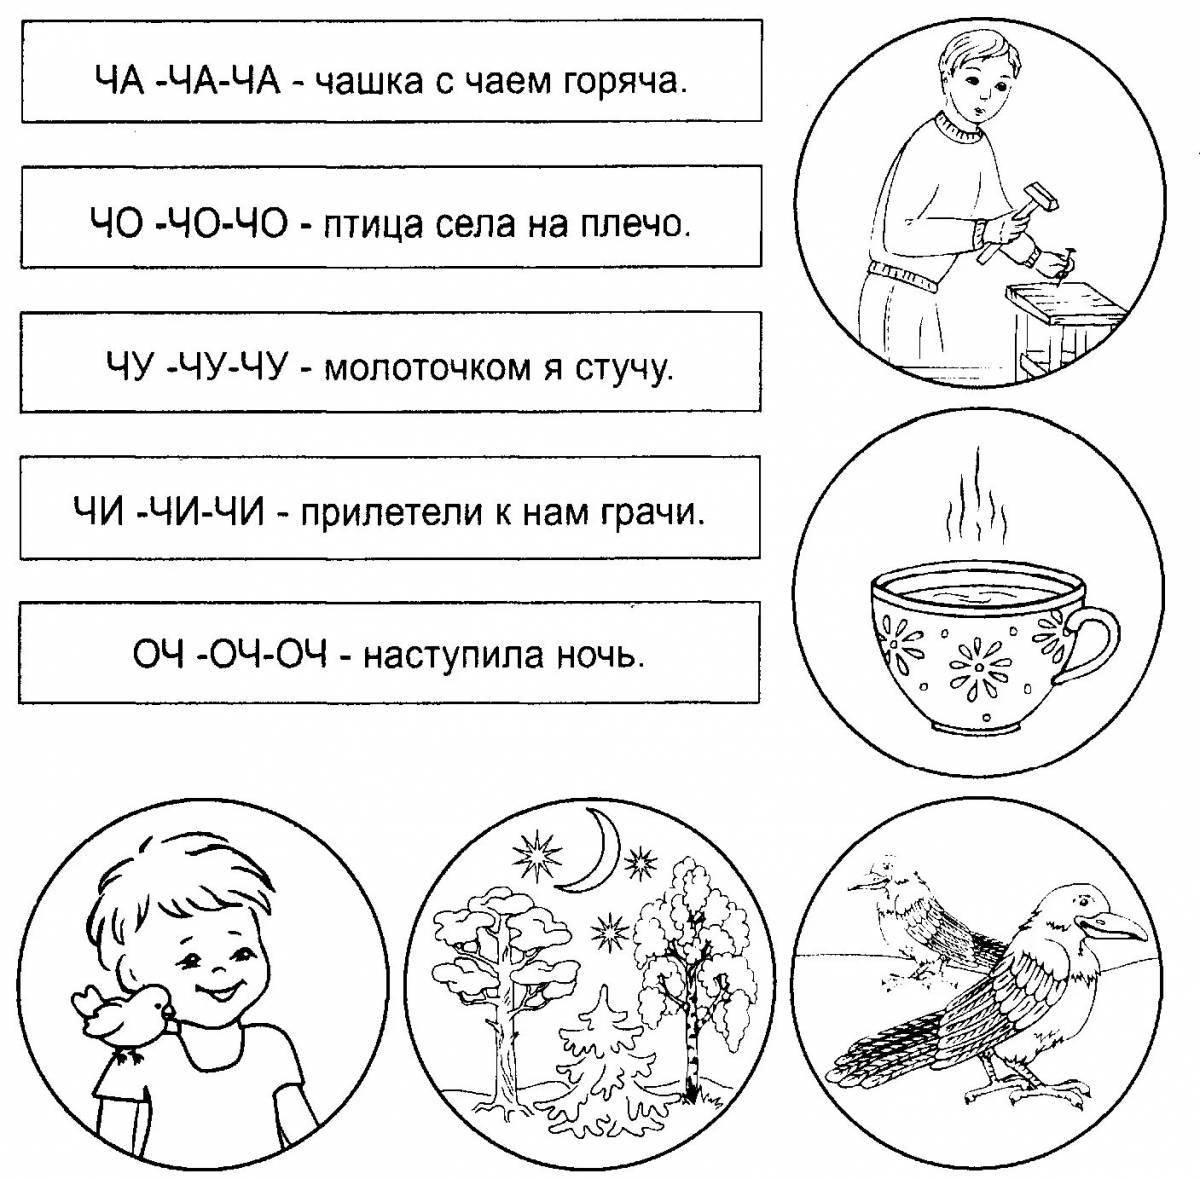 Worksheet for creative speech therapy